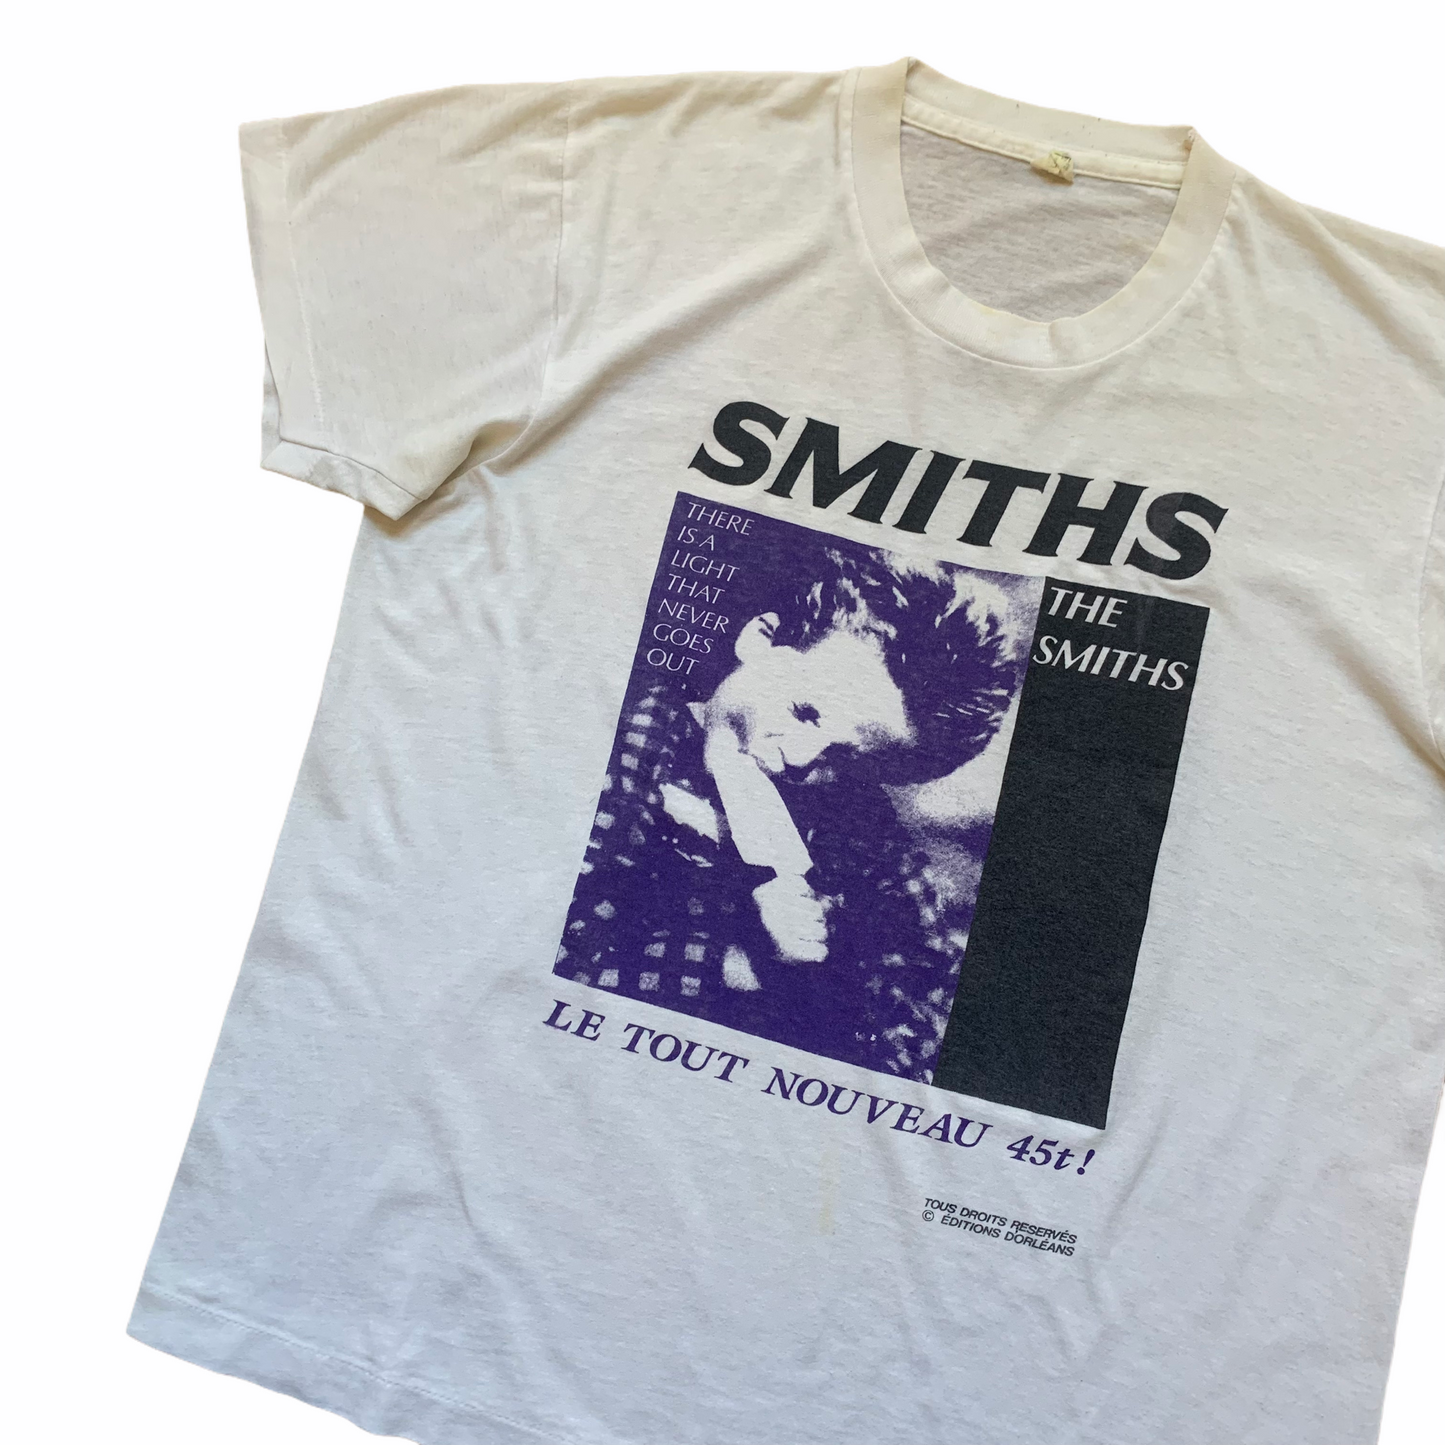 1986 The Smiths 'There Is A Light' (M)